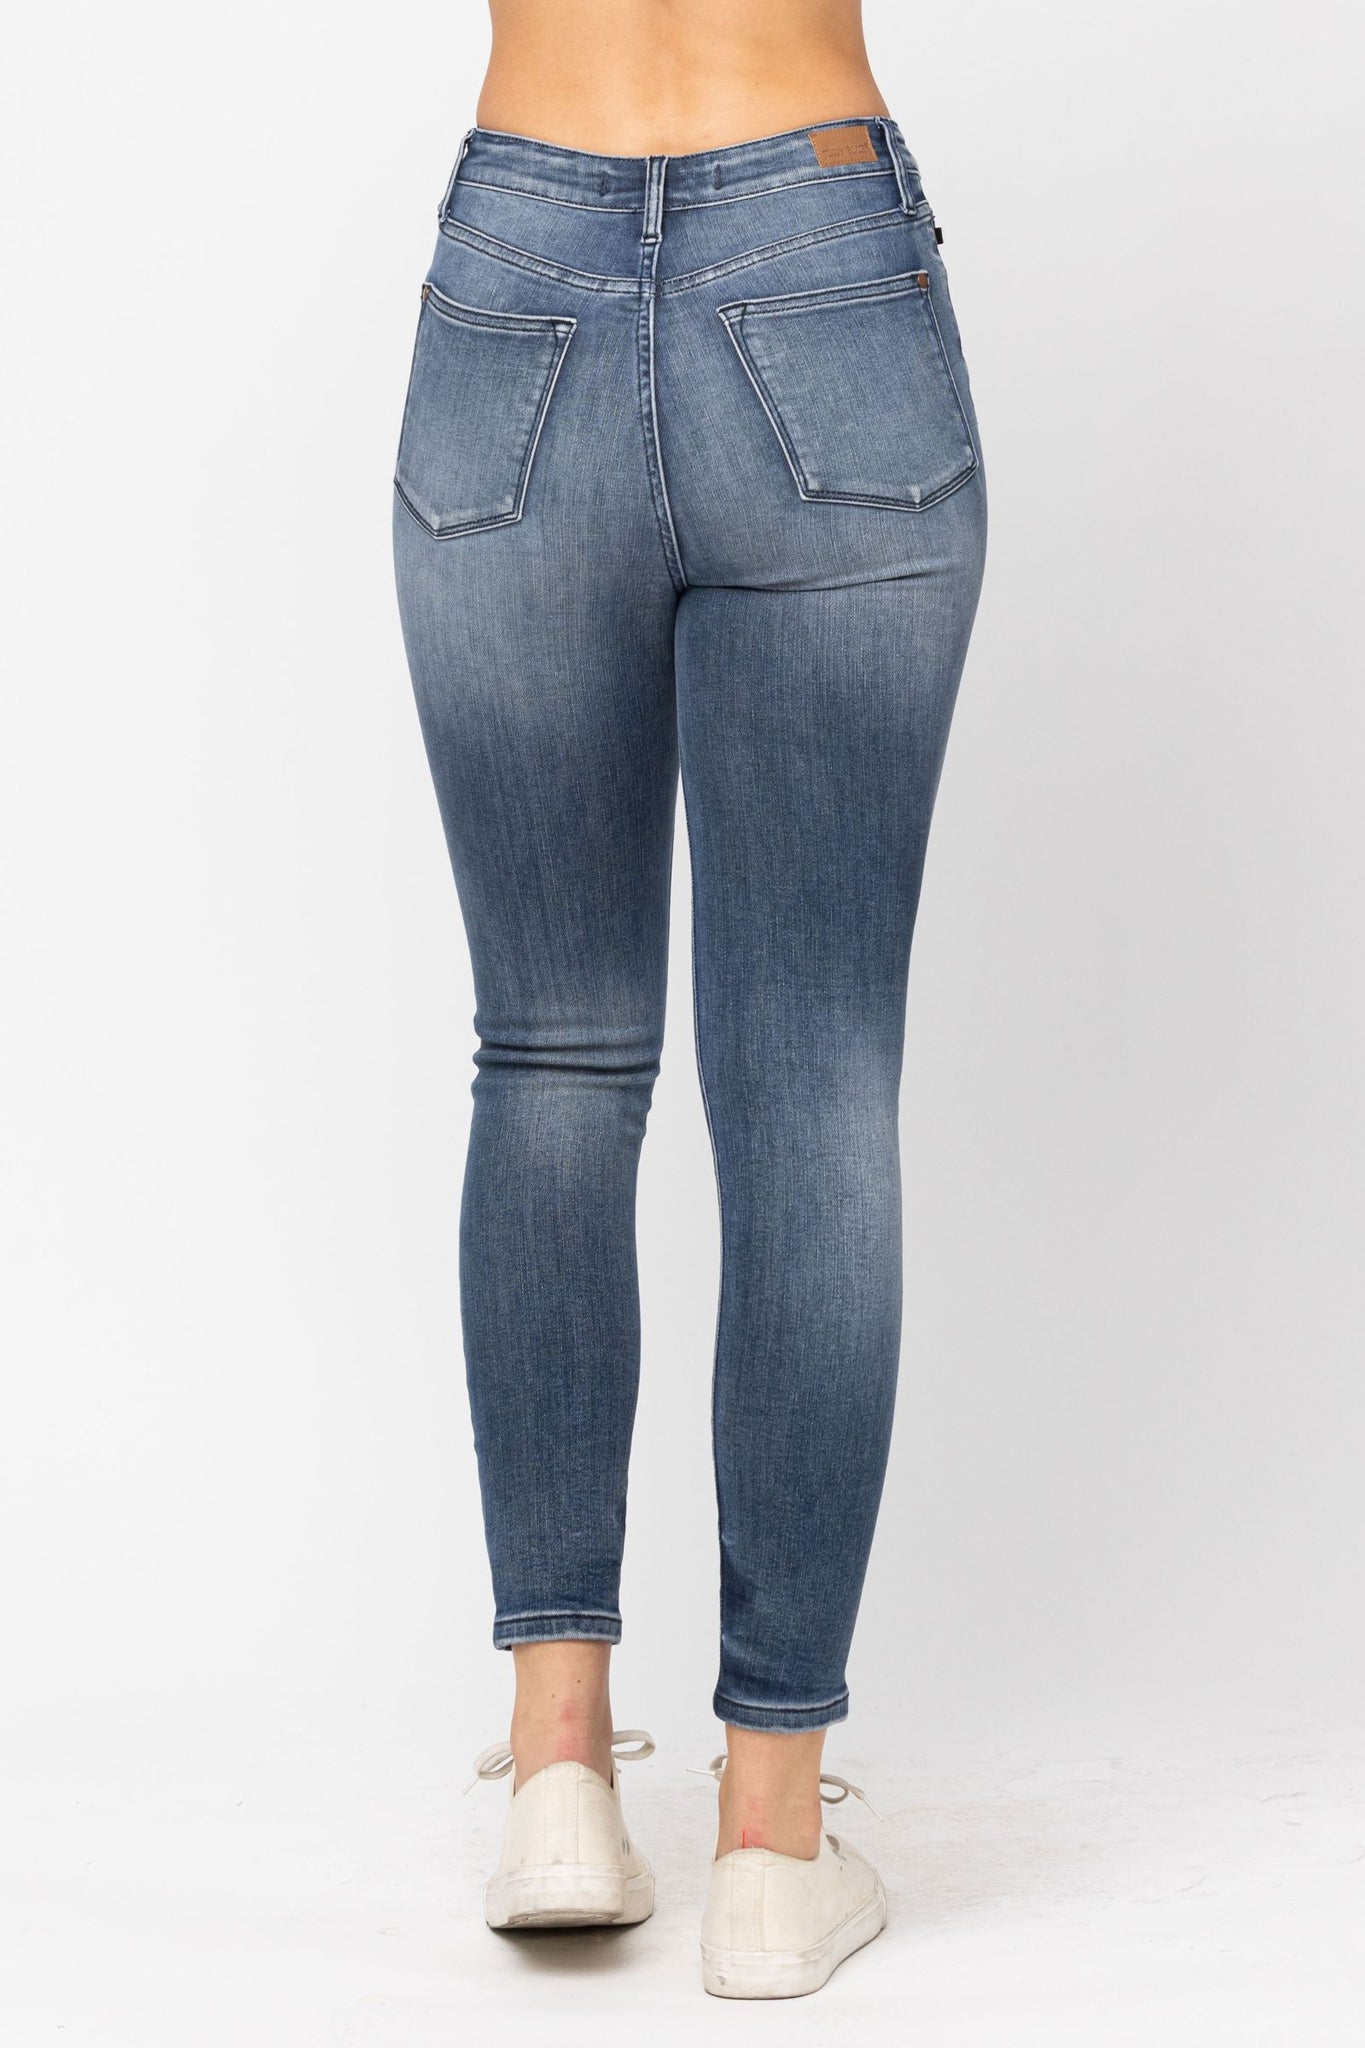 JUDY BLUE HIGH WAIST TUMMY CONTROL CONTRAST SKINNY JEANS – The Chandelier  Rose Boutique